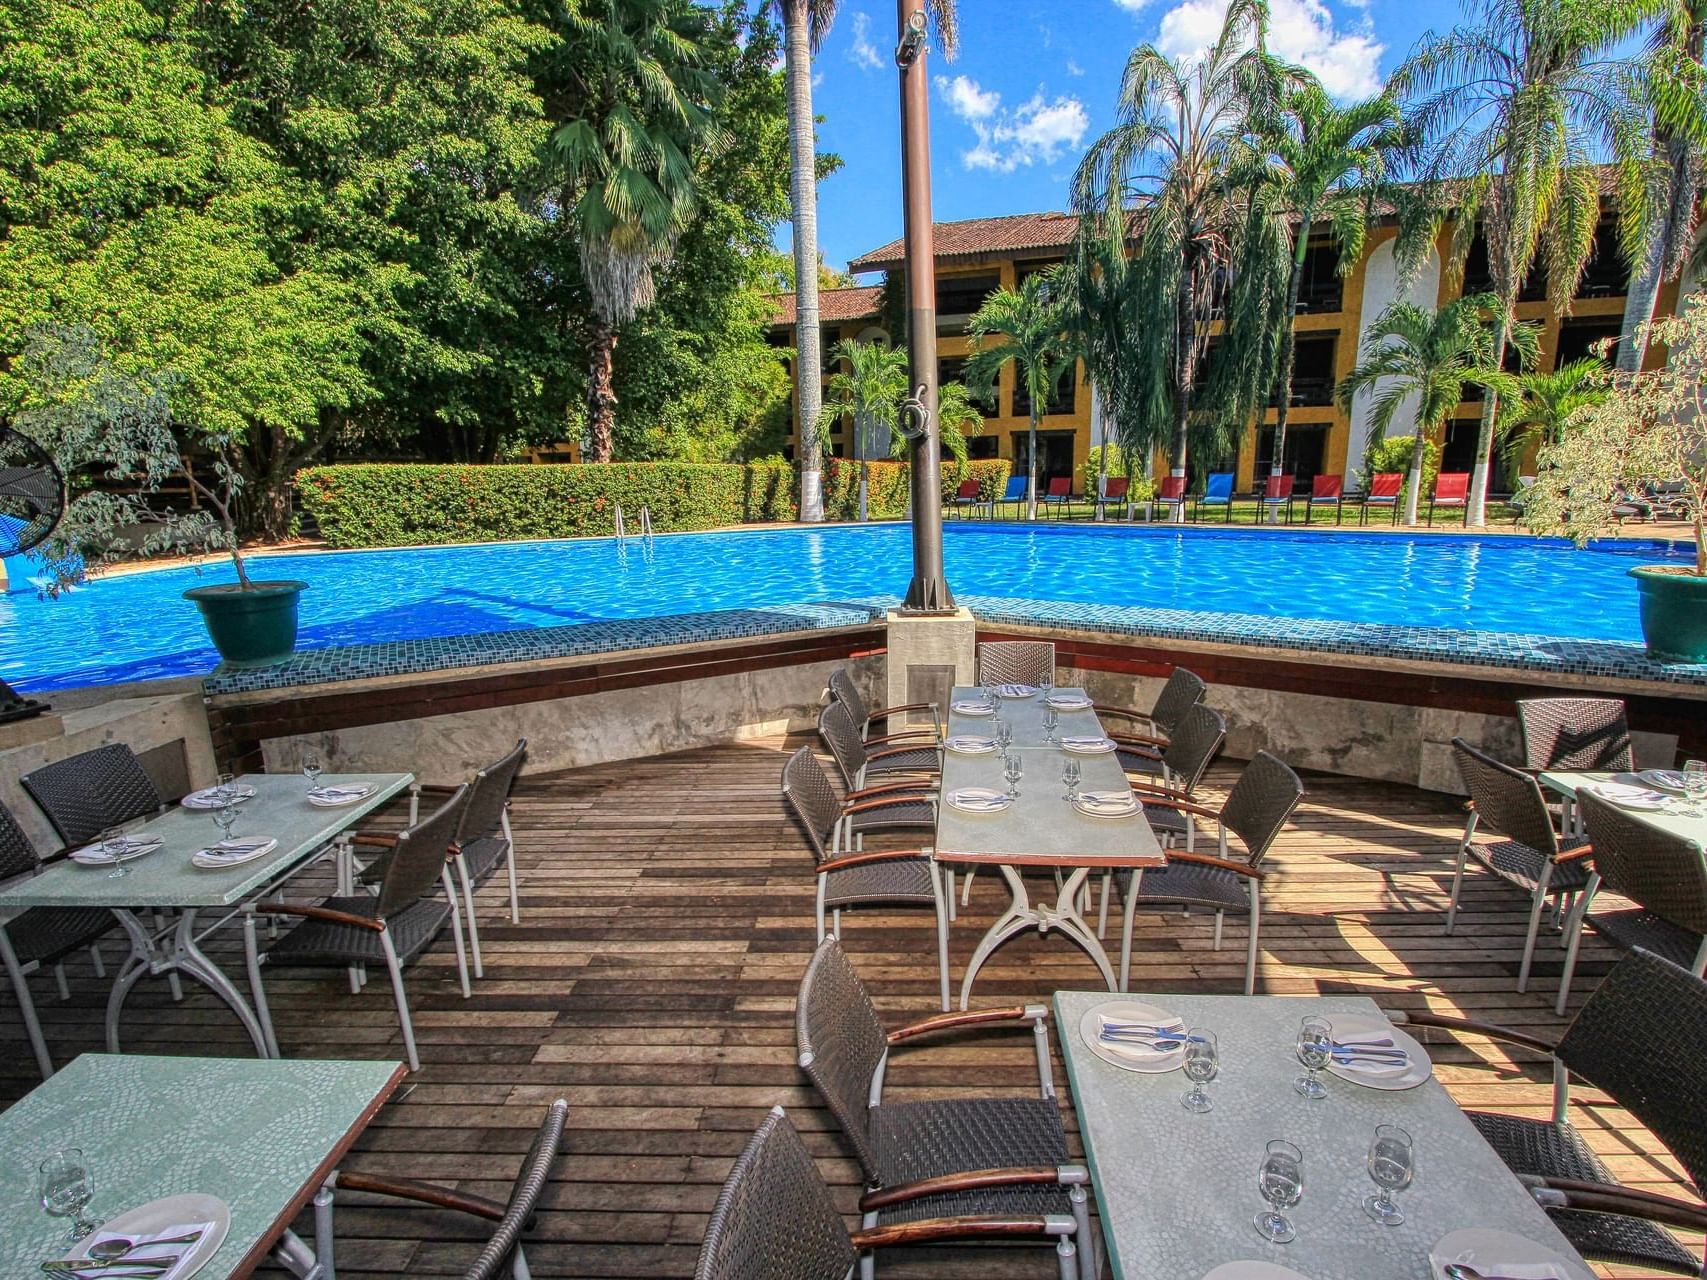 Dining area by the pool in The Palms at Ciudad Real Palenque